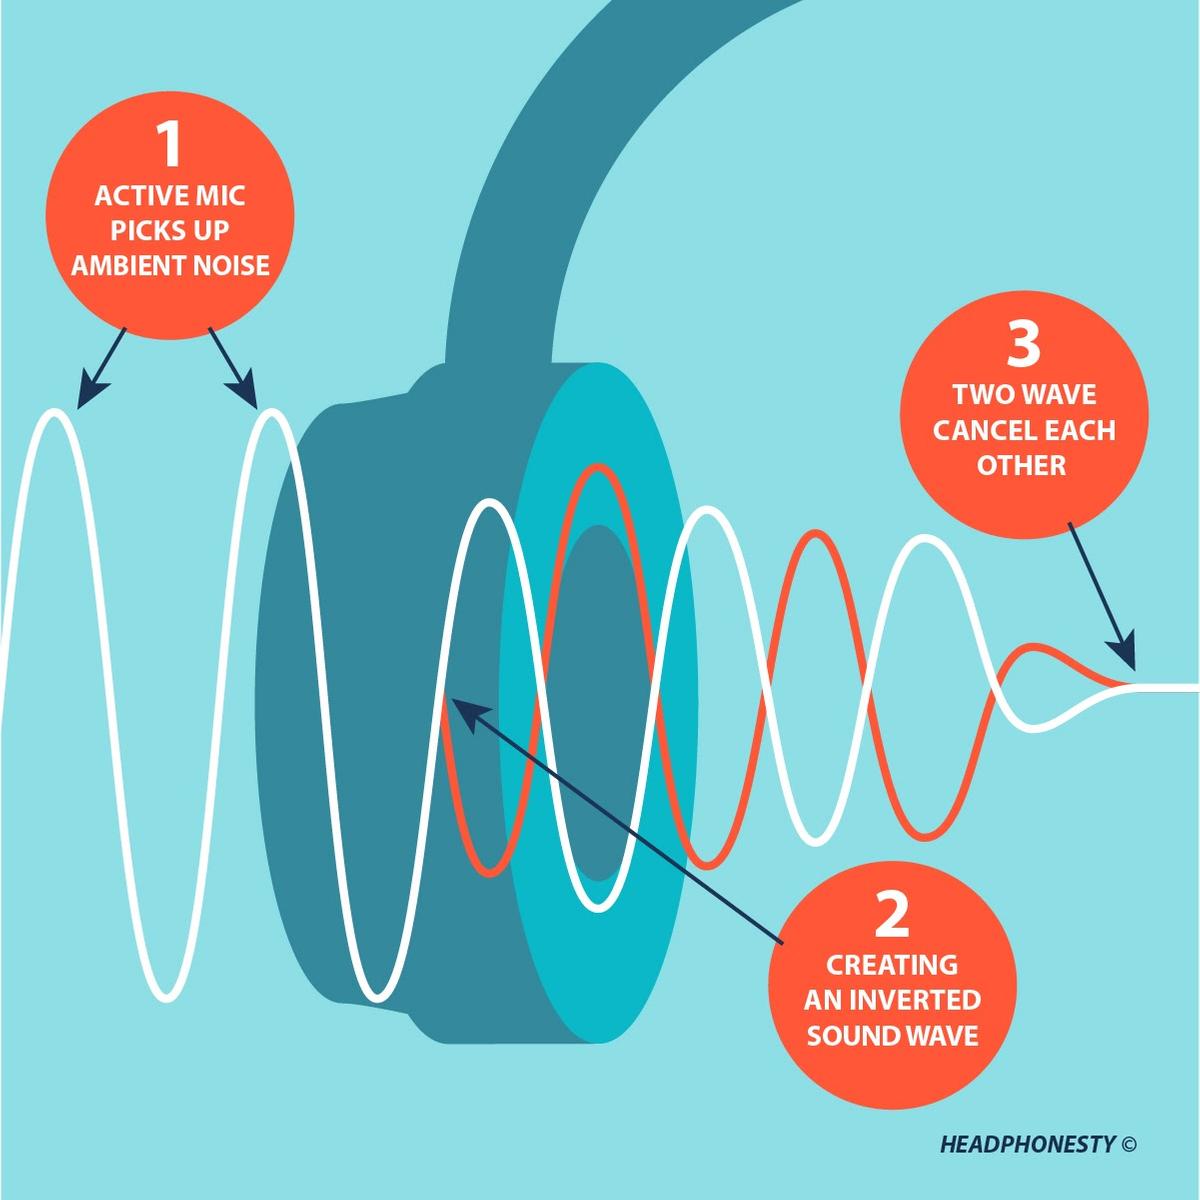 How active noise cancellation in headphones works